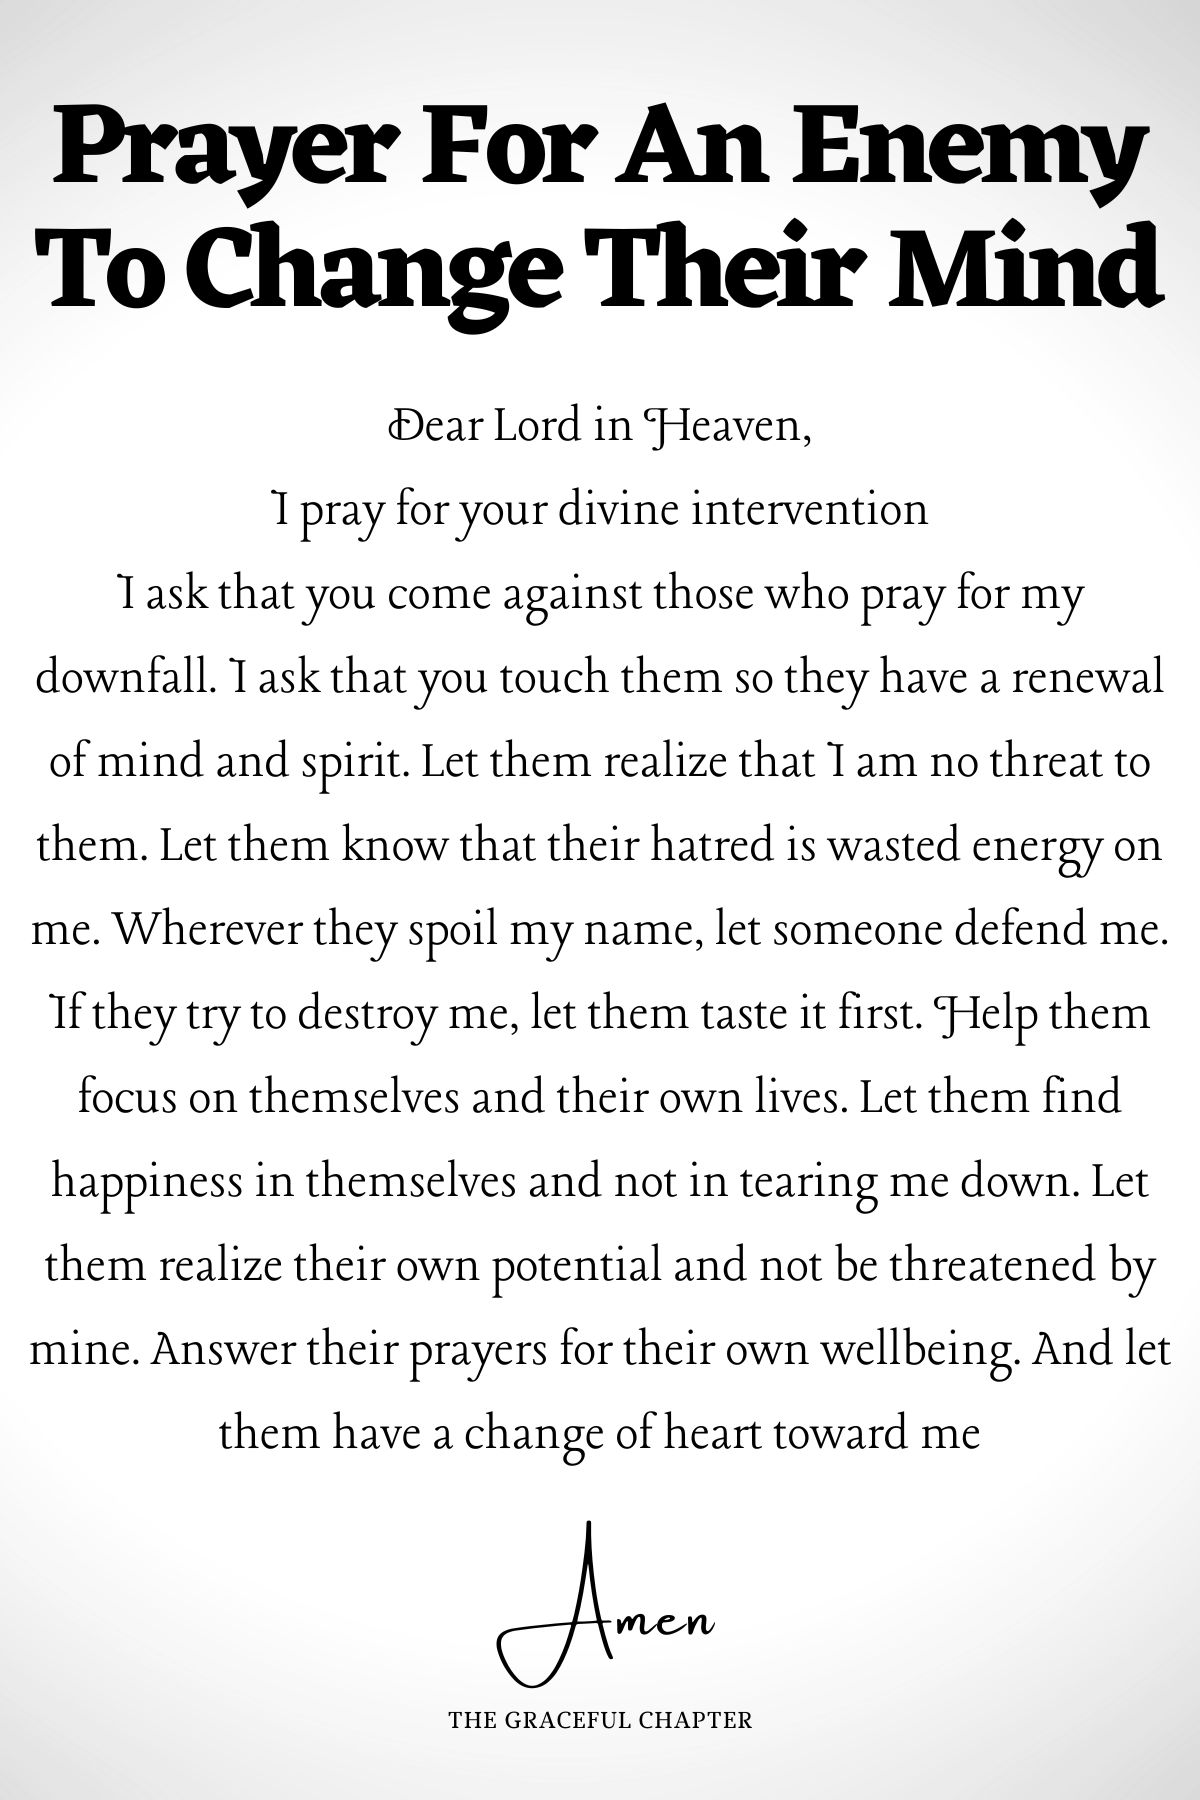 Prayer For An Enemy To Change Their Mind